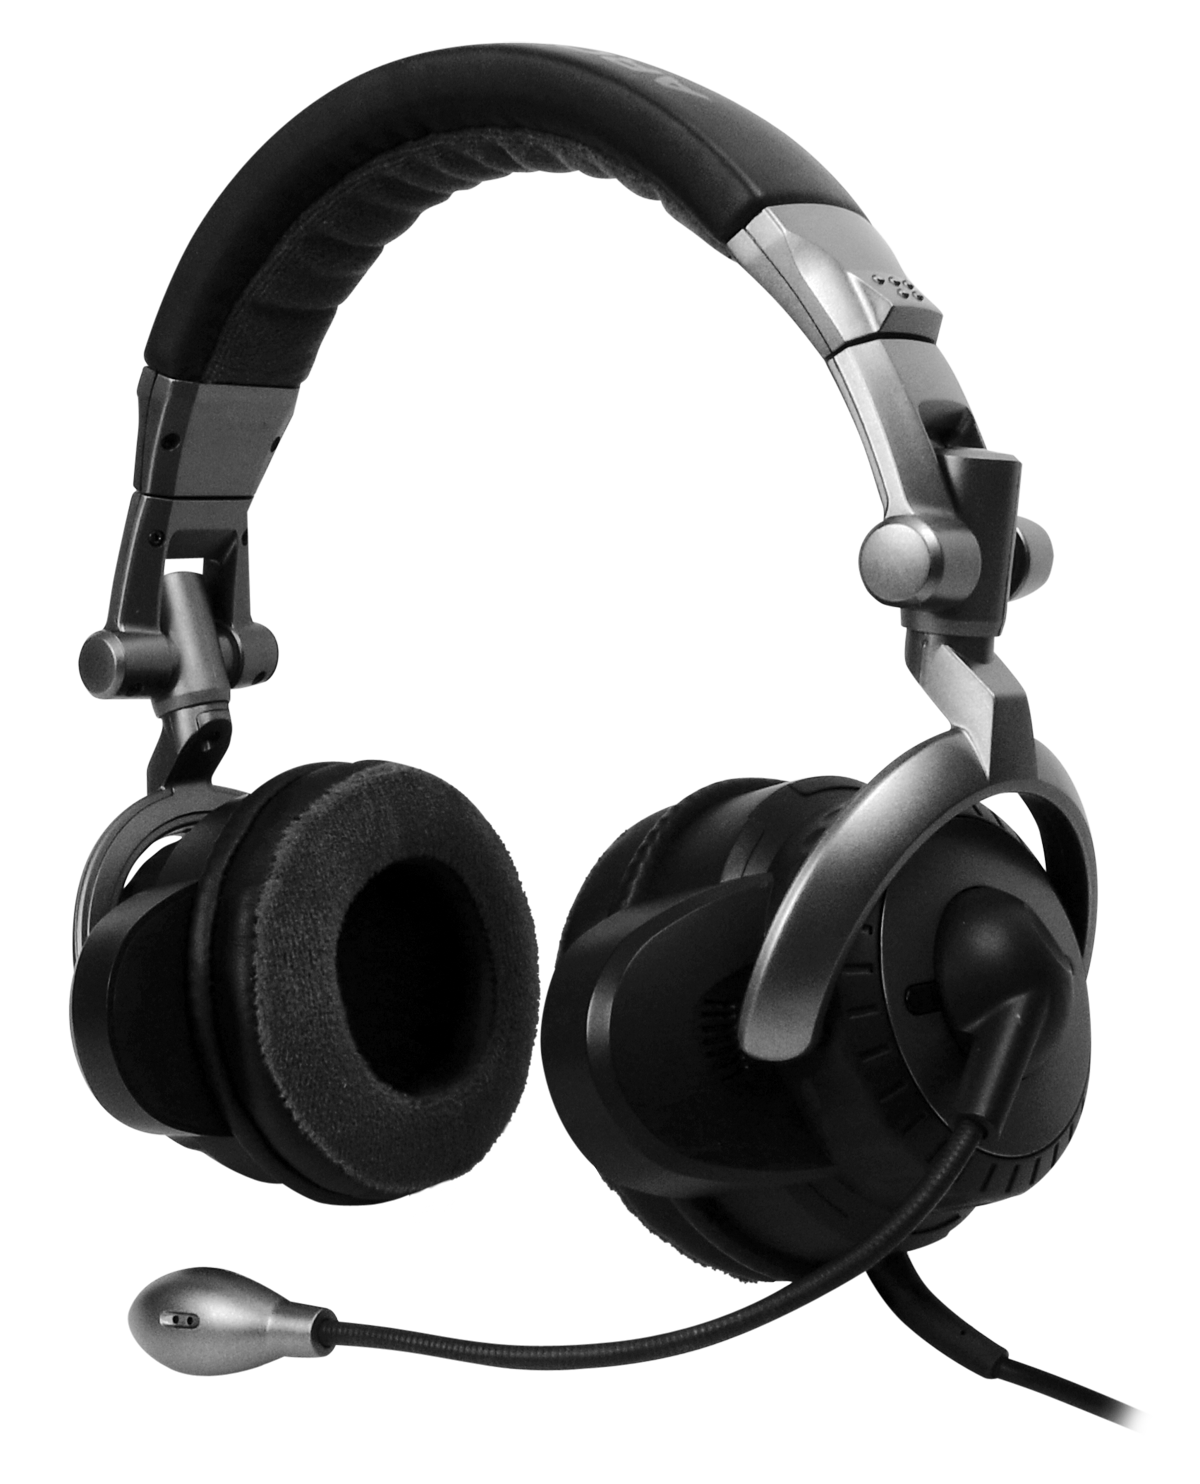 Arctic Gear Review Pt 1: P531 USB Powered 5.1 Surround Sound Headset